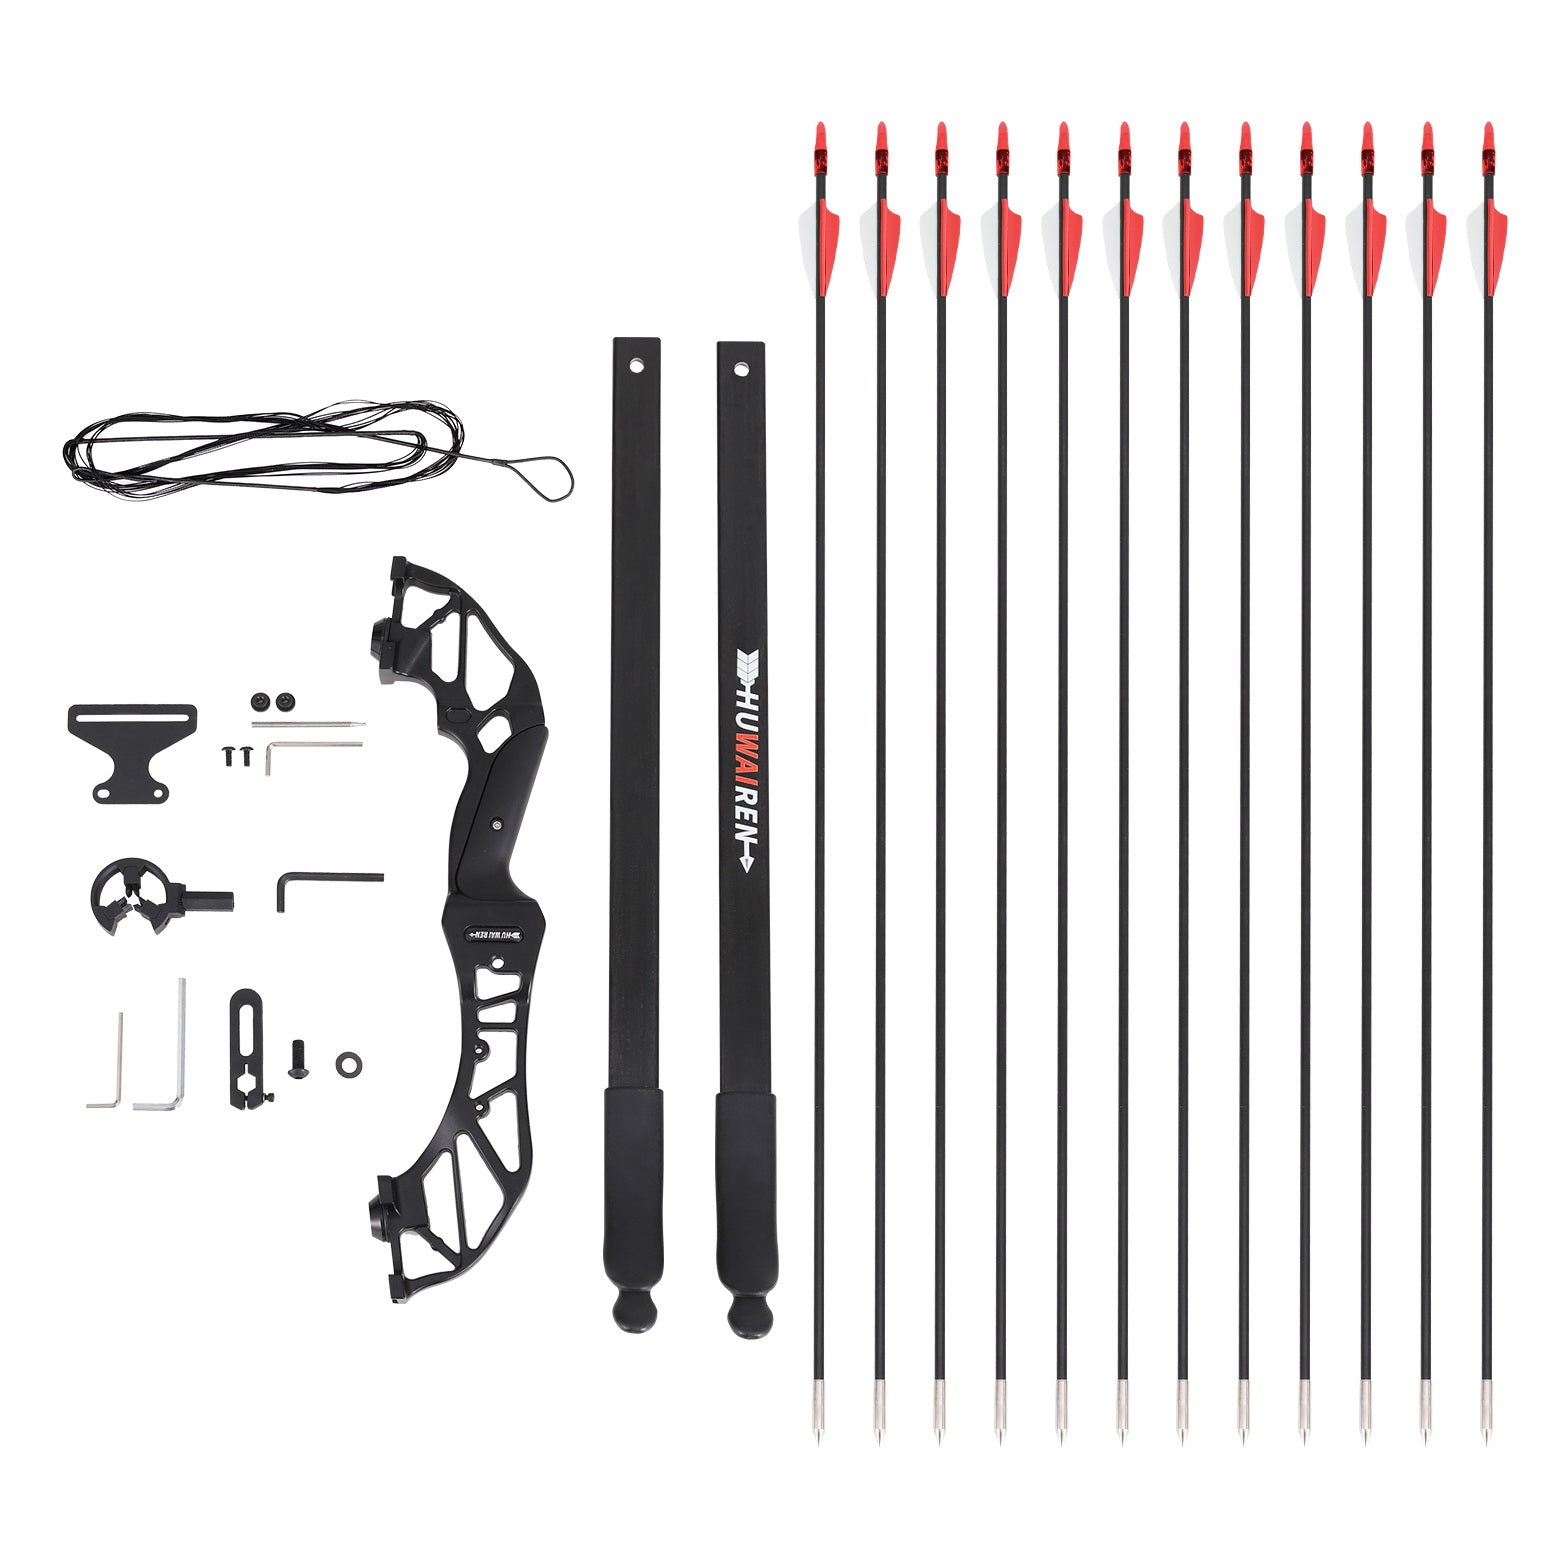 Everfit 55lbs Bow Arrow Set Recurve Takedown Archery Hunting for Beginner Red